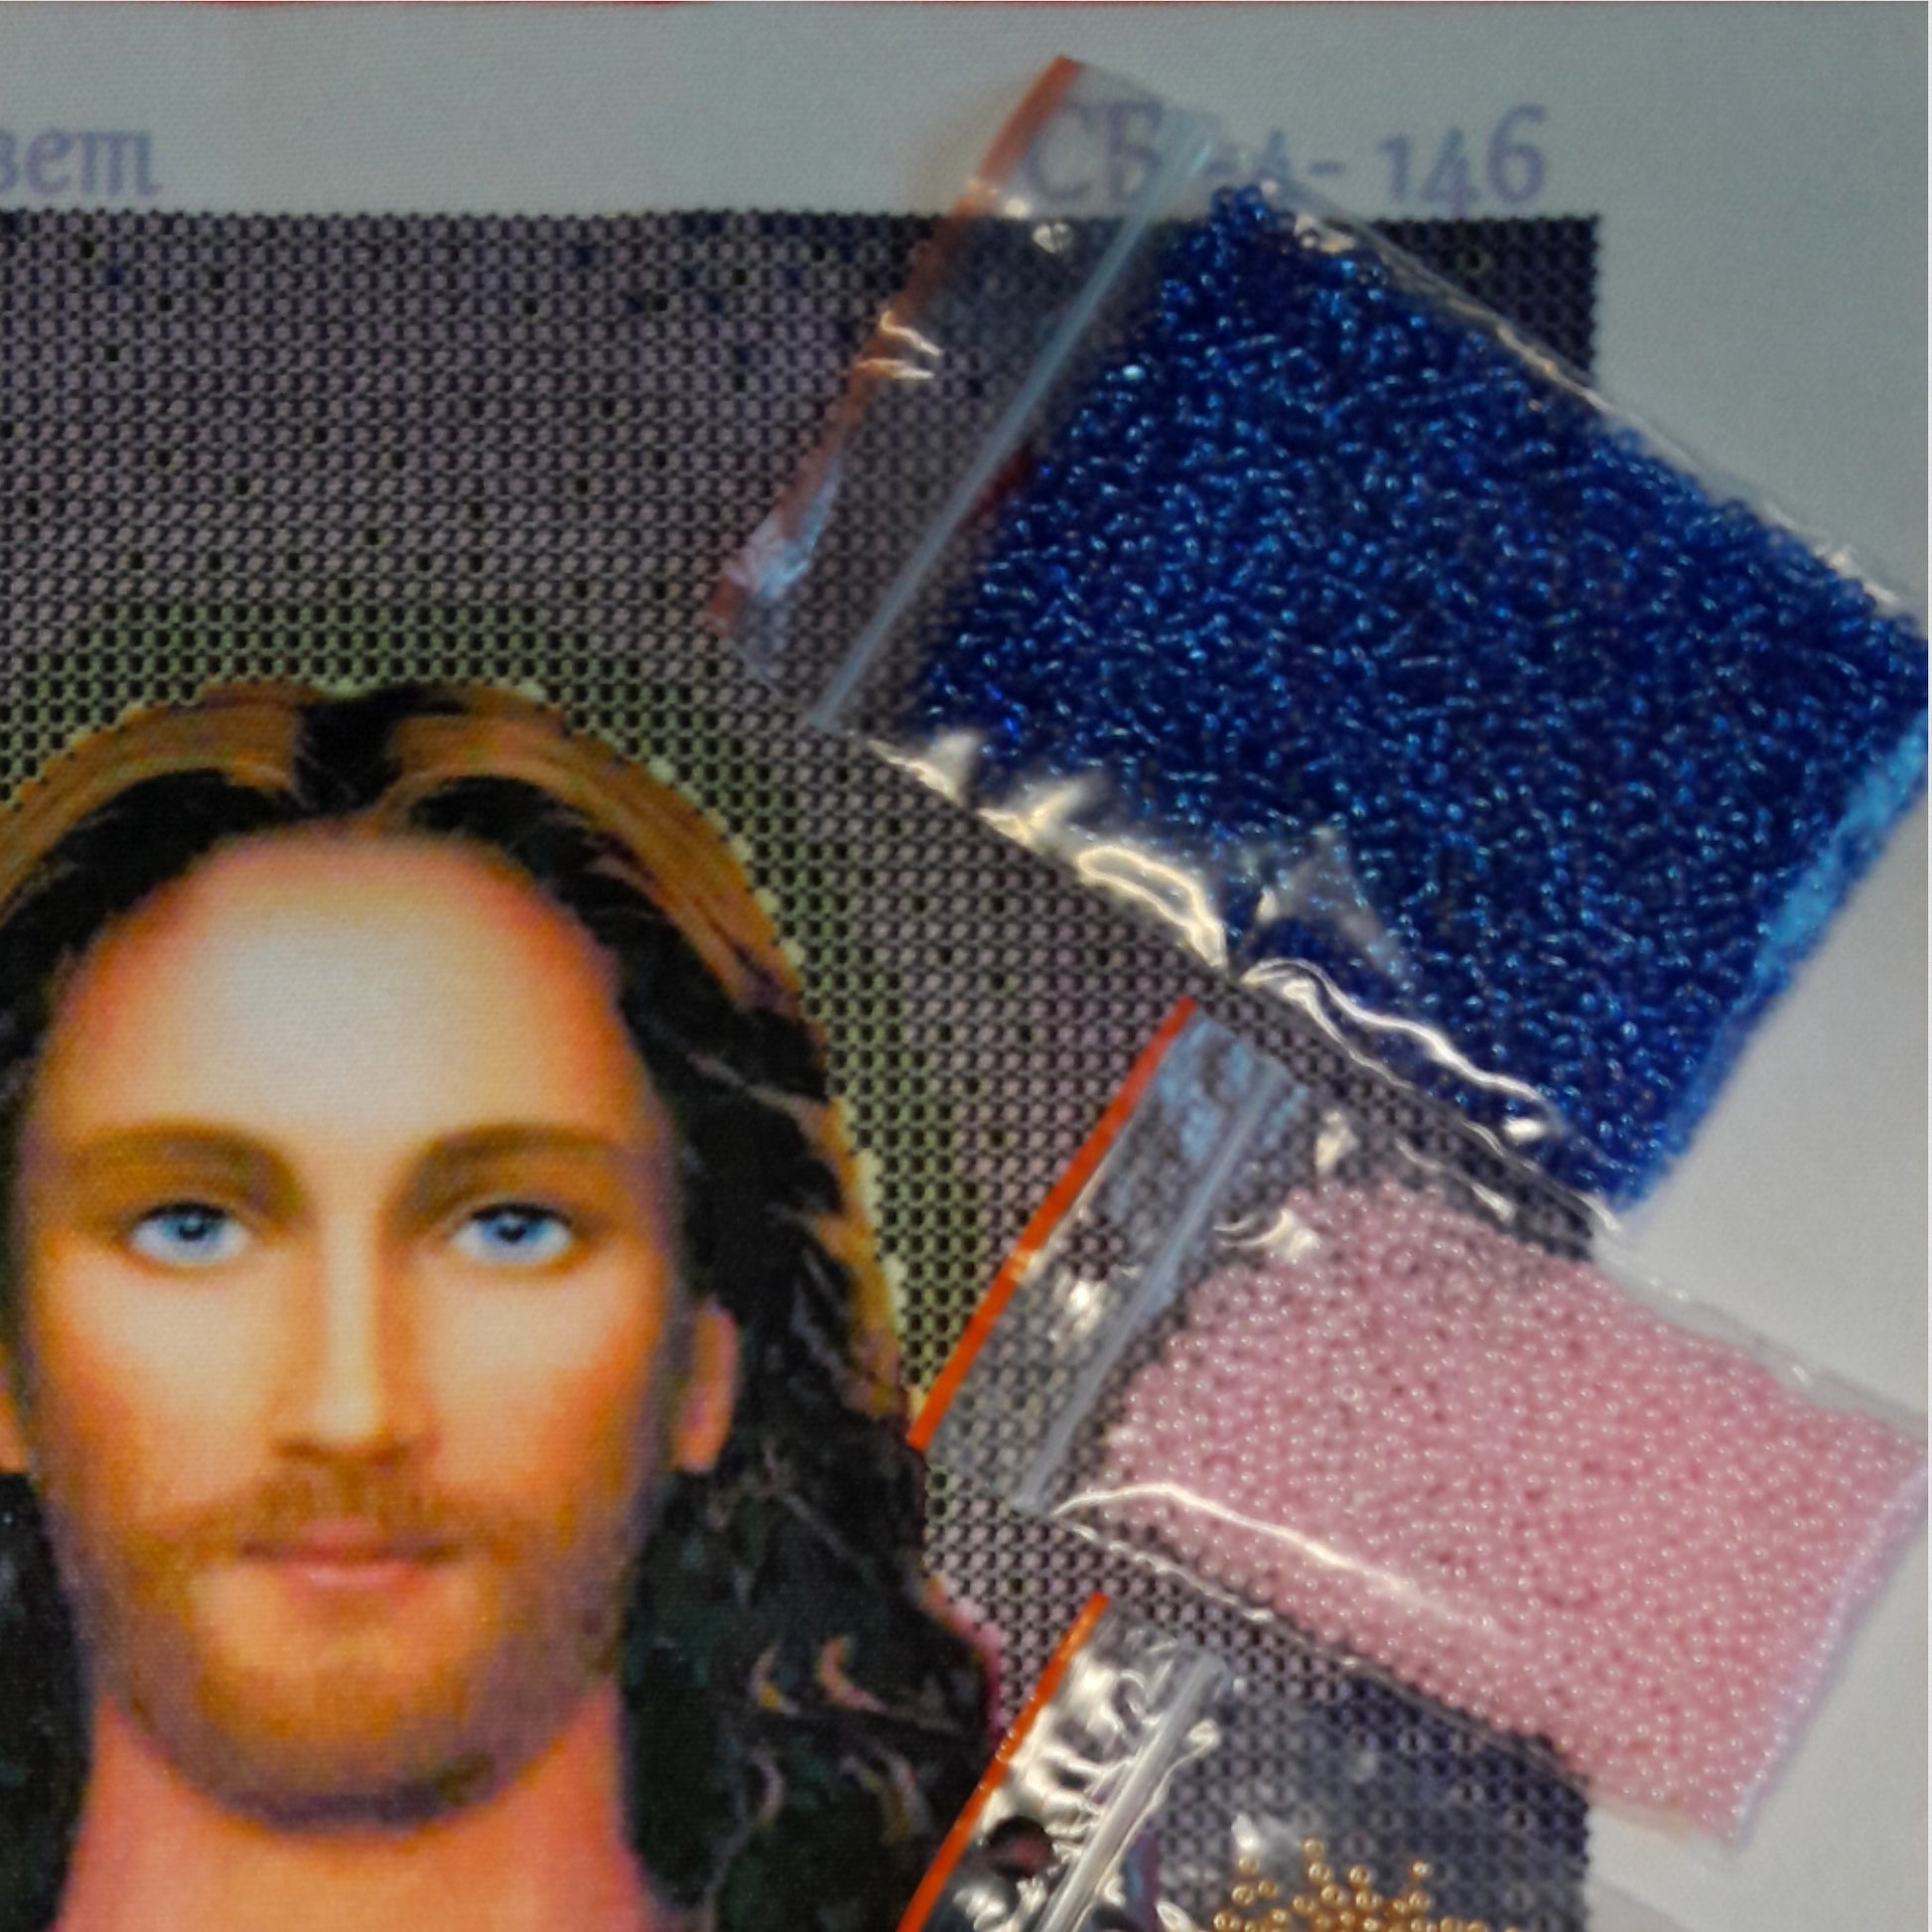 DIY Bead embroidery kit icon "Jesus bringer of light". Size: 9.1 - 11.8 in (23 - 30 сm) - VadymShop